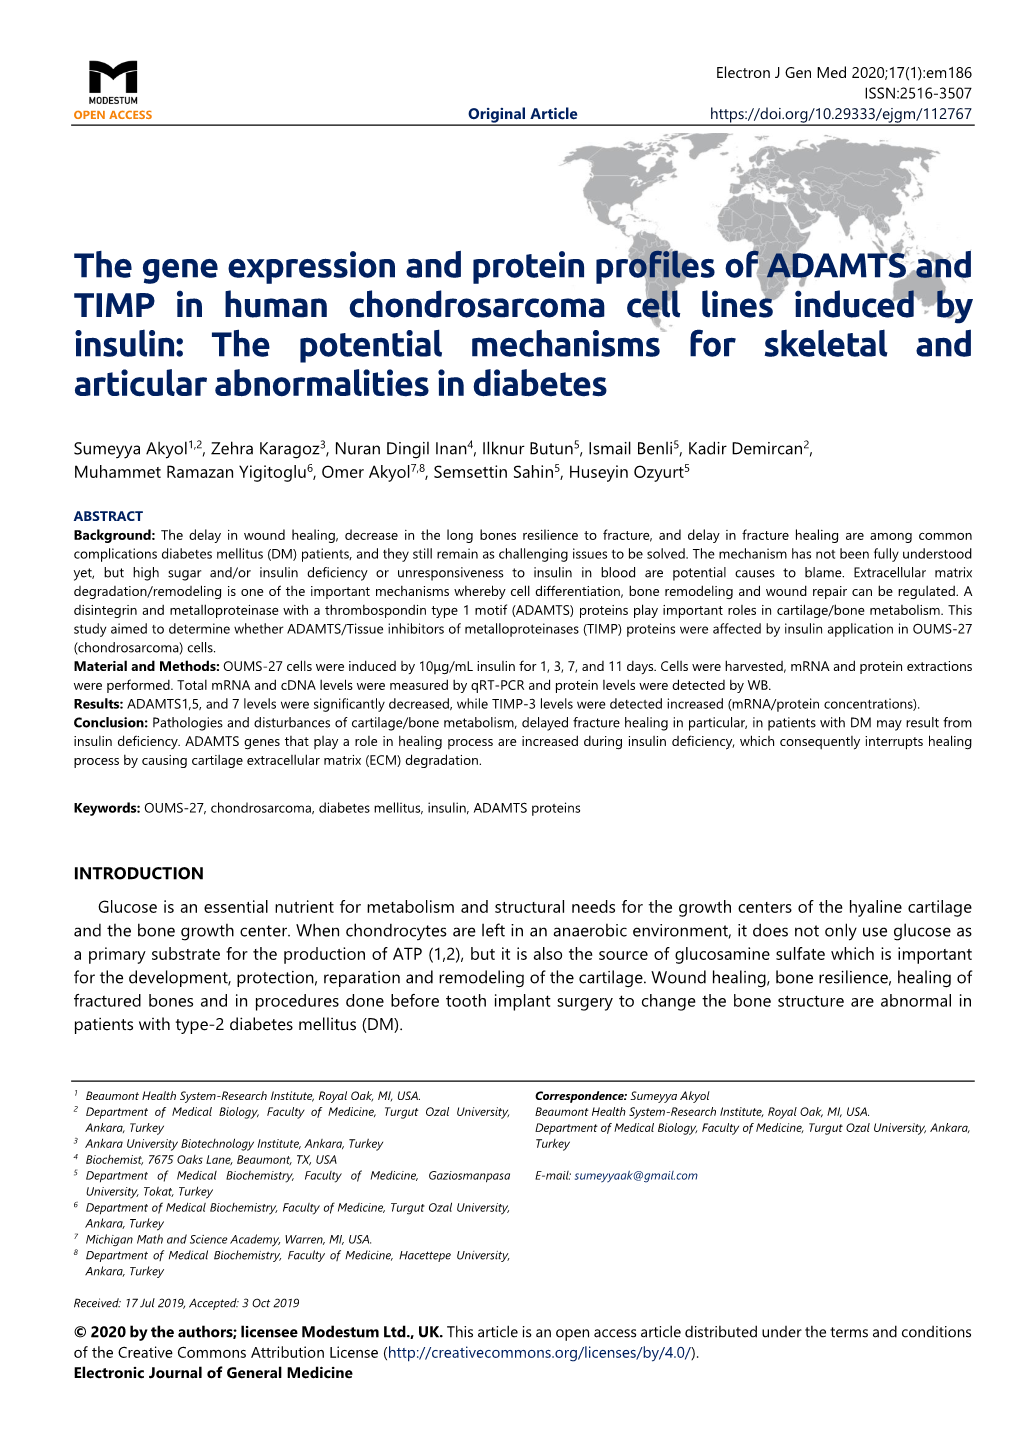 The Gene Expression and Protein Profiles of ADAMTS and TIMP In